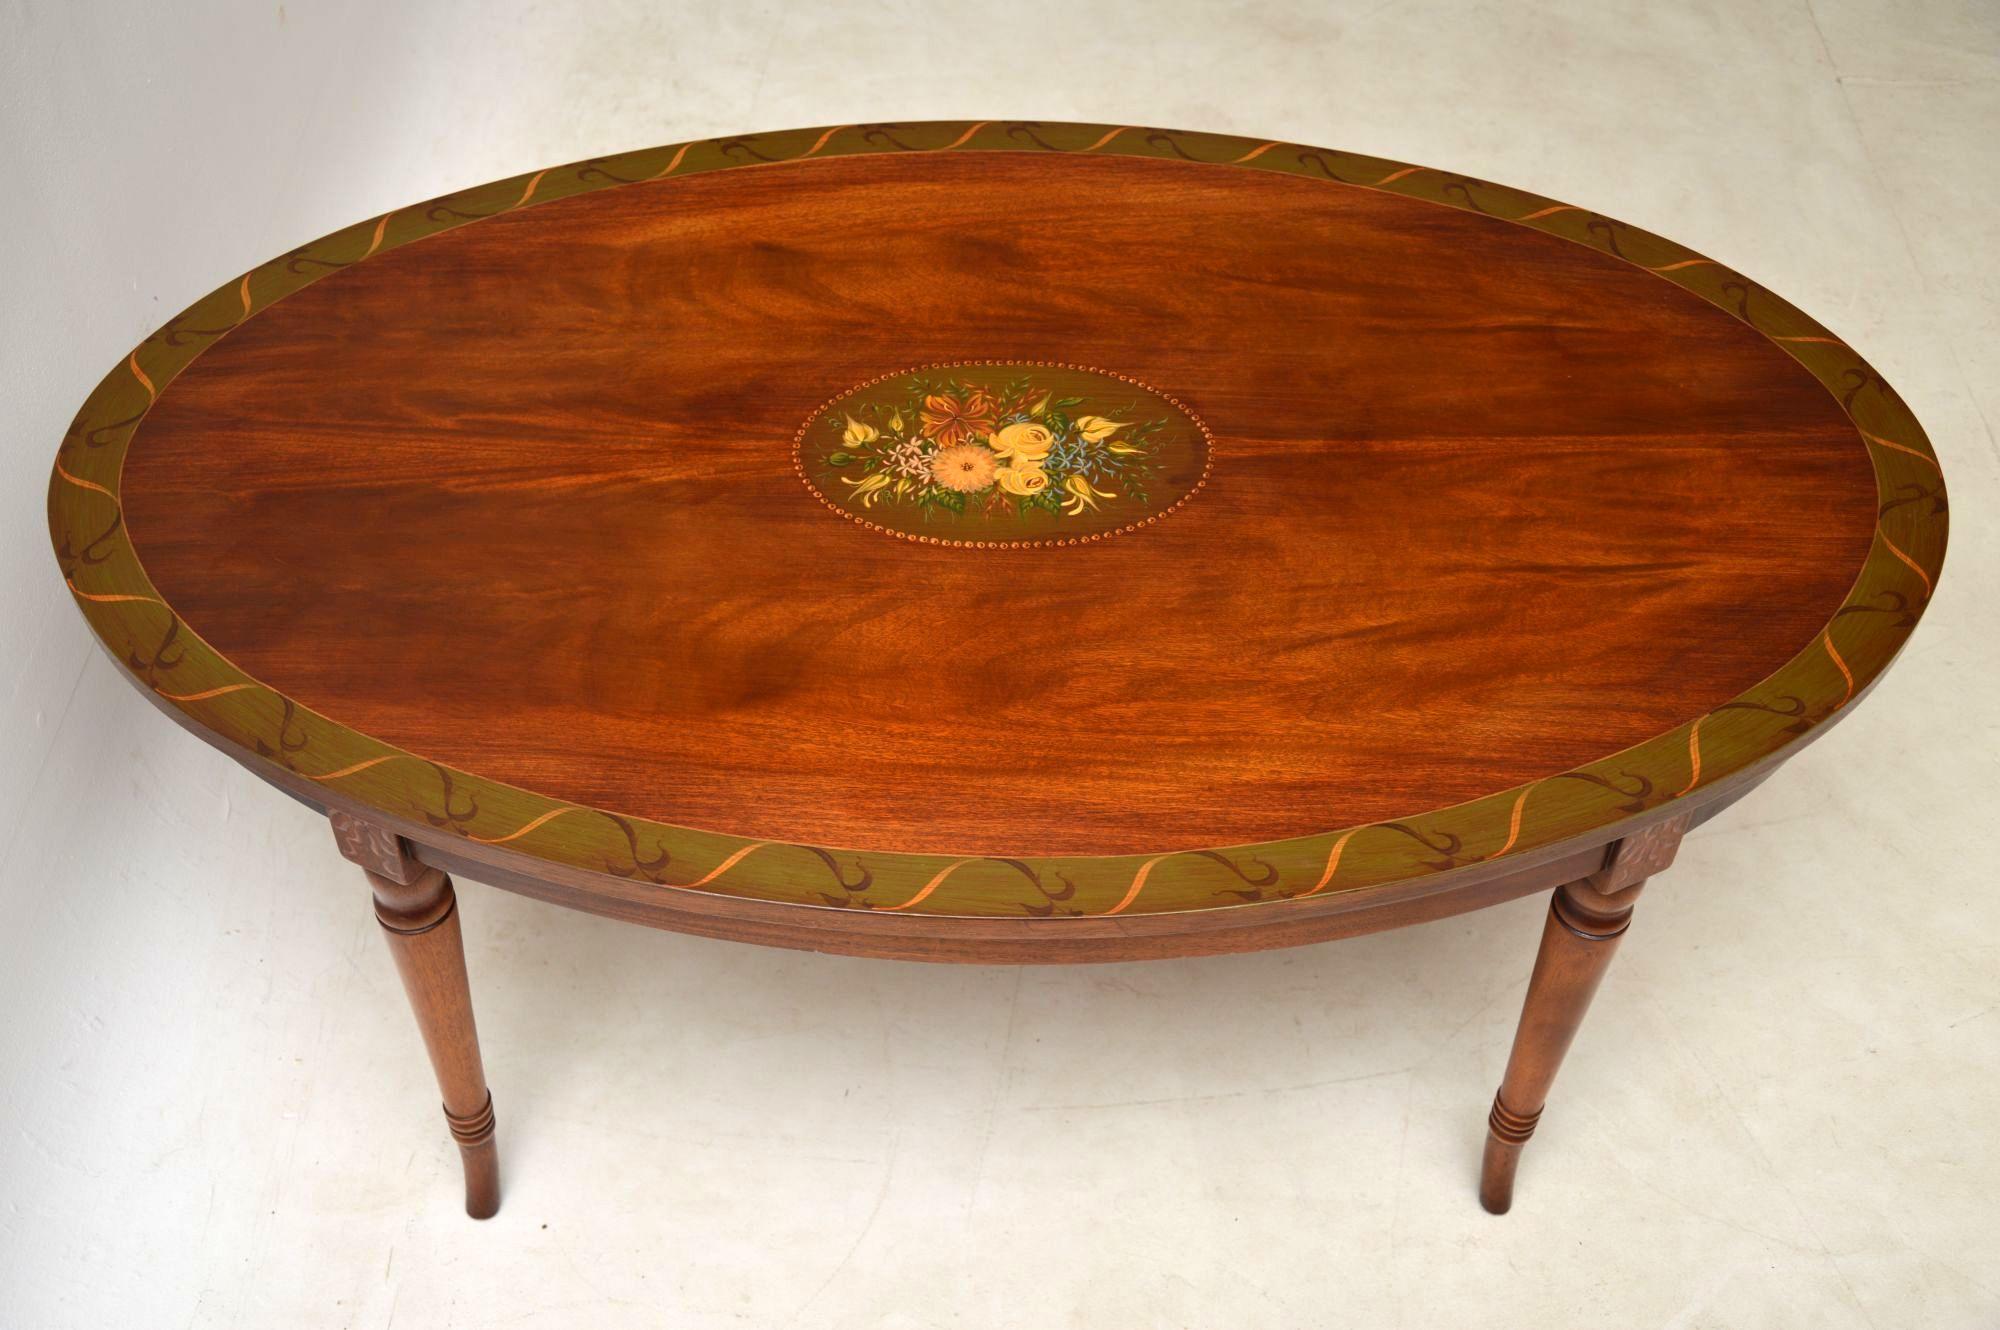 English Antique Painted Mahogany Coffee Table